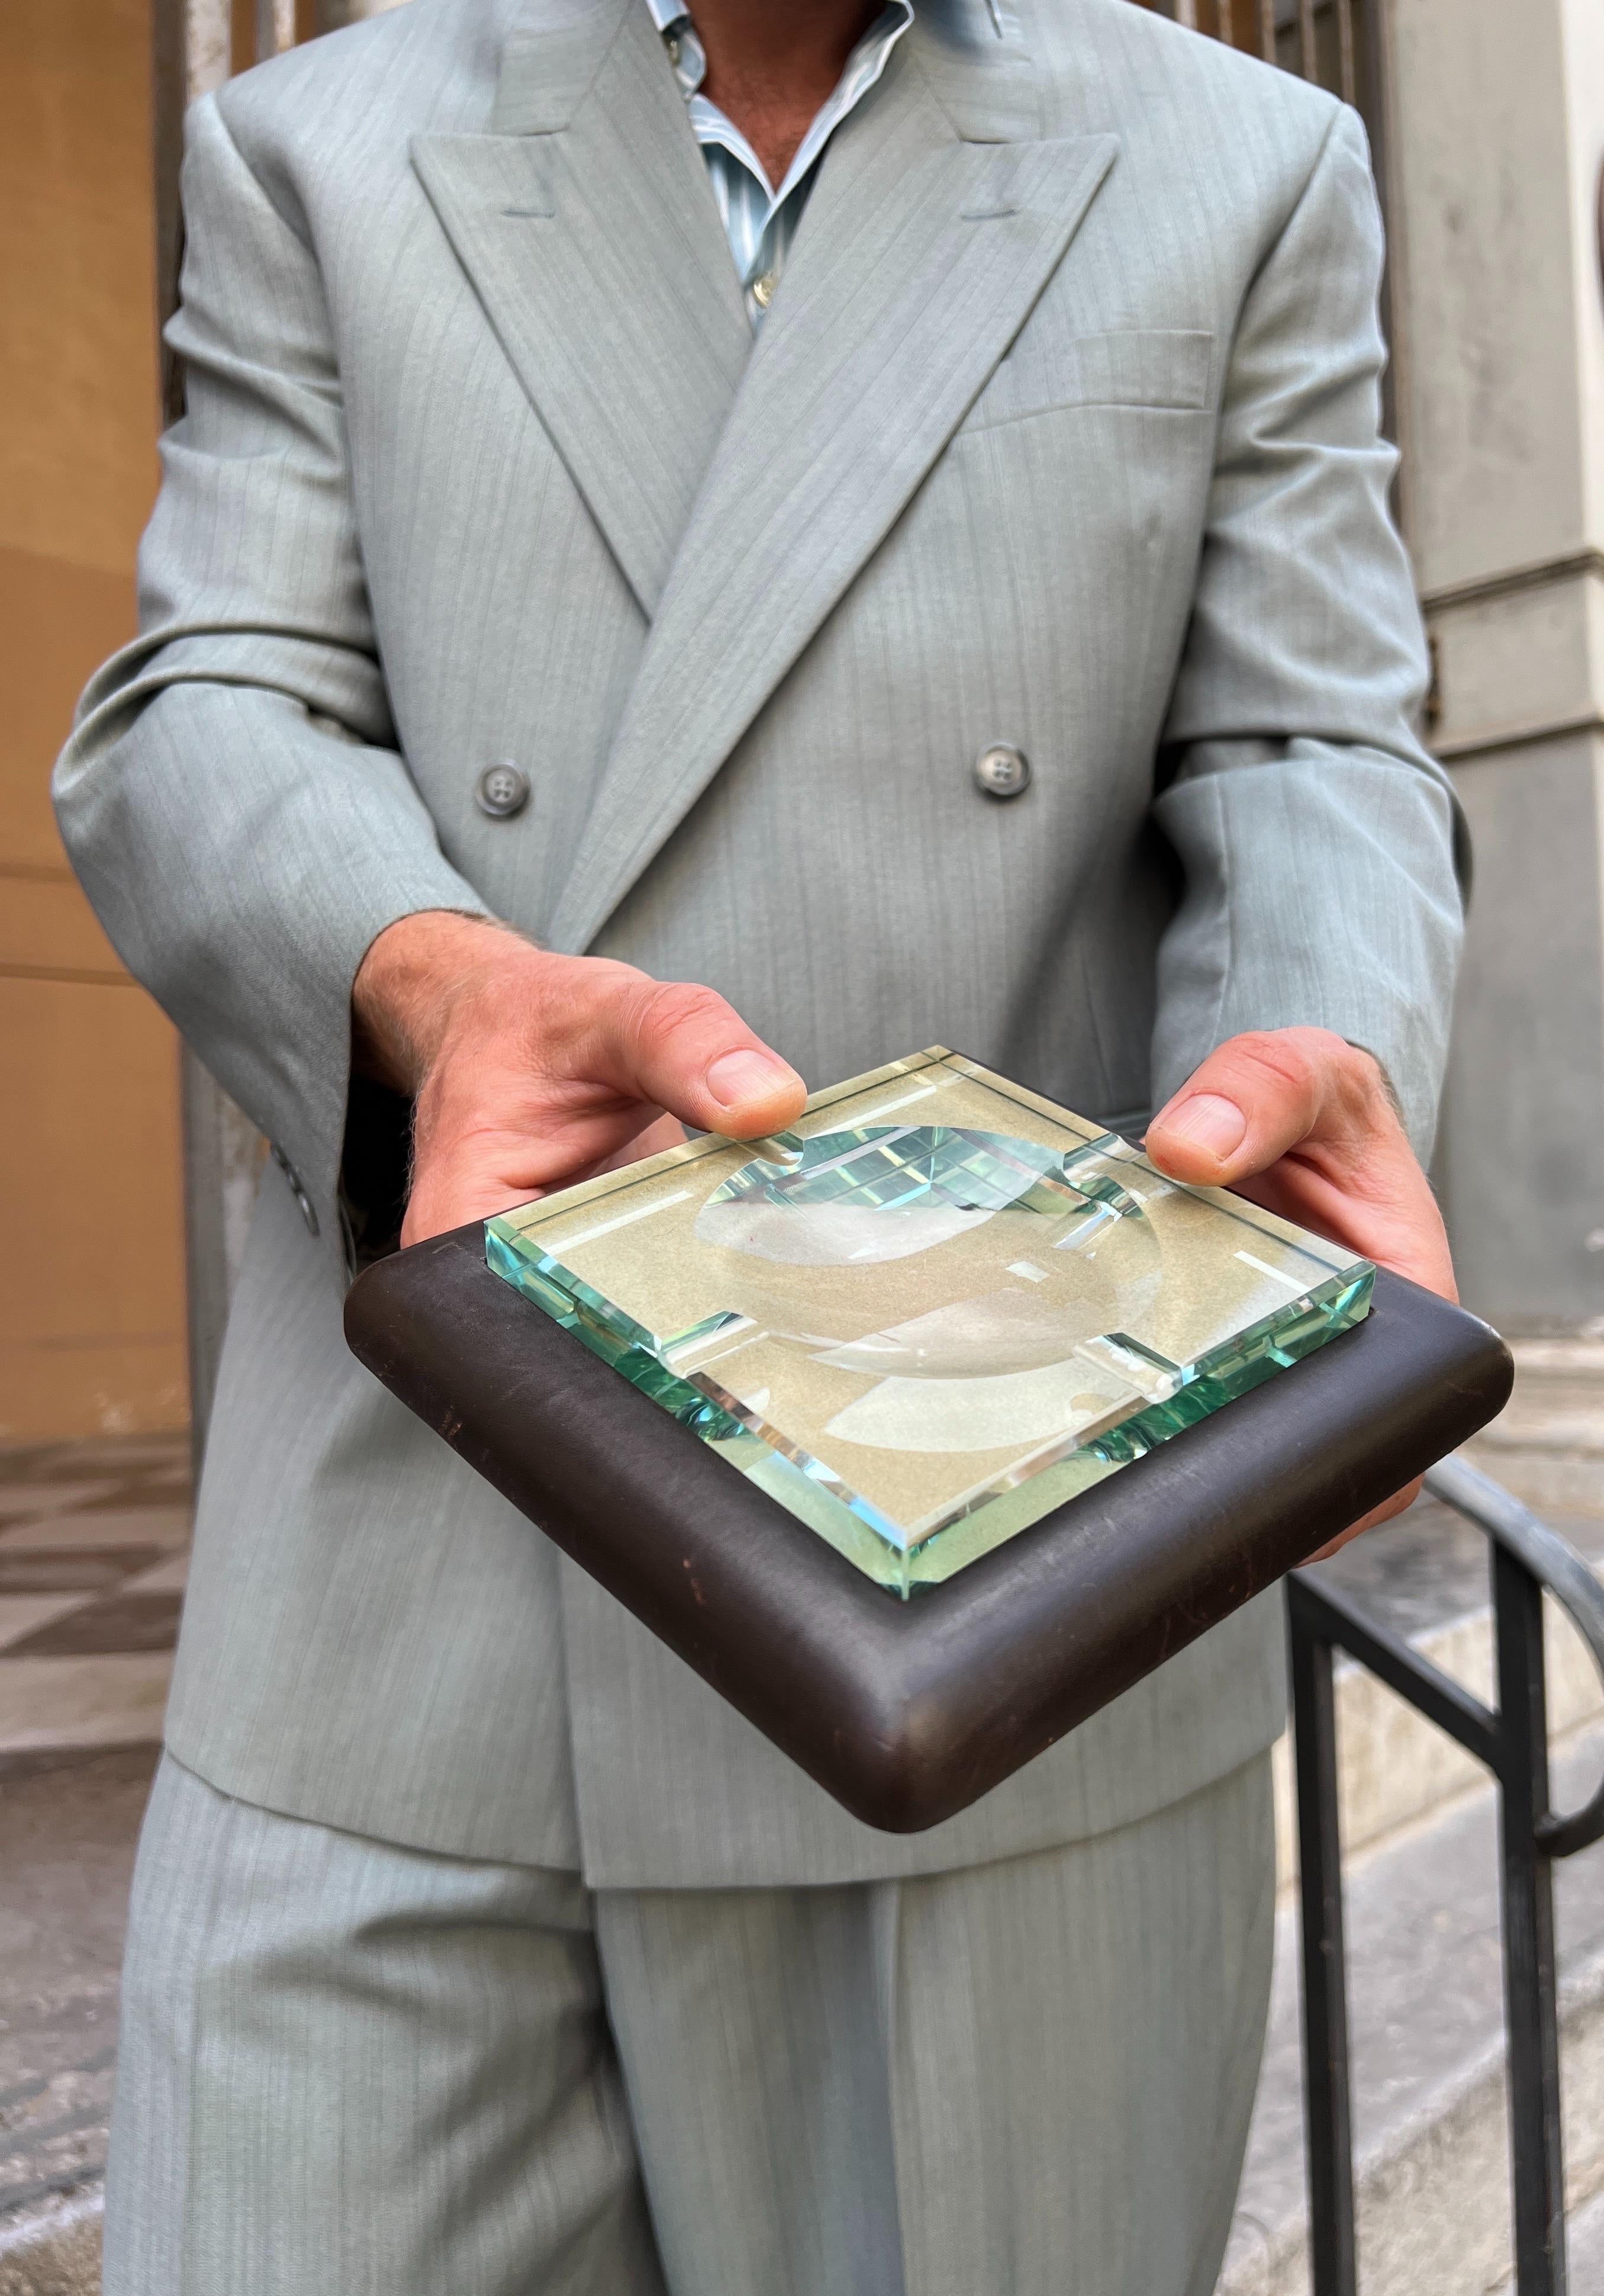 Indulge in the elegance of this exquisite ashtray, crafted in Italy during the prestigious Fontana Arte's prime in the 1960s. The square-shaped design boasts a transparent crystal glass with a subtle green hue, exquisitely placed on a dark brown